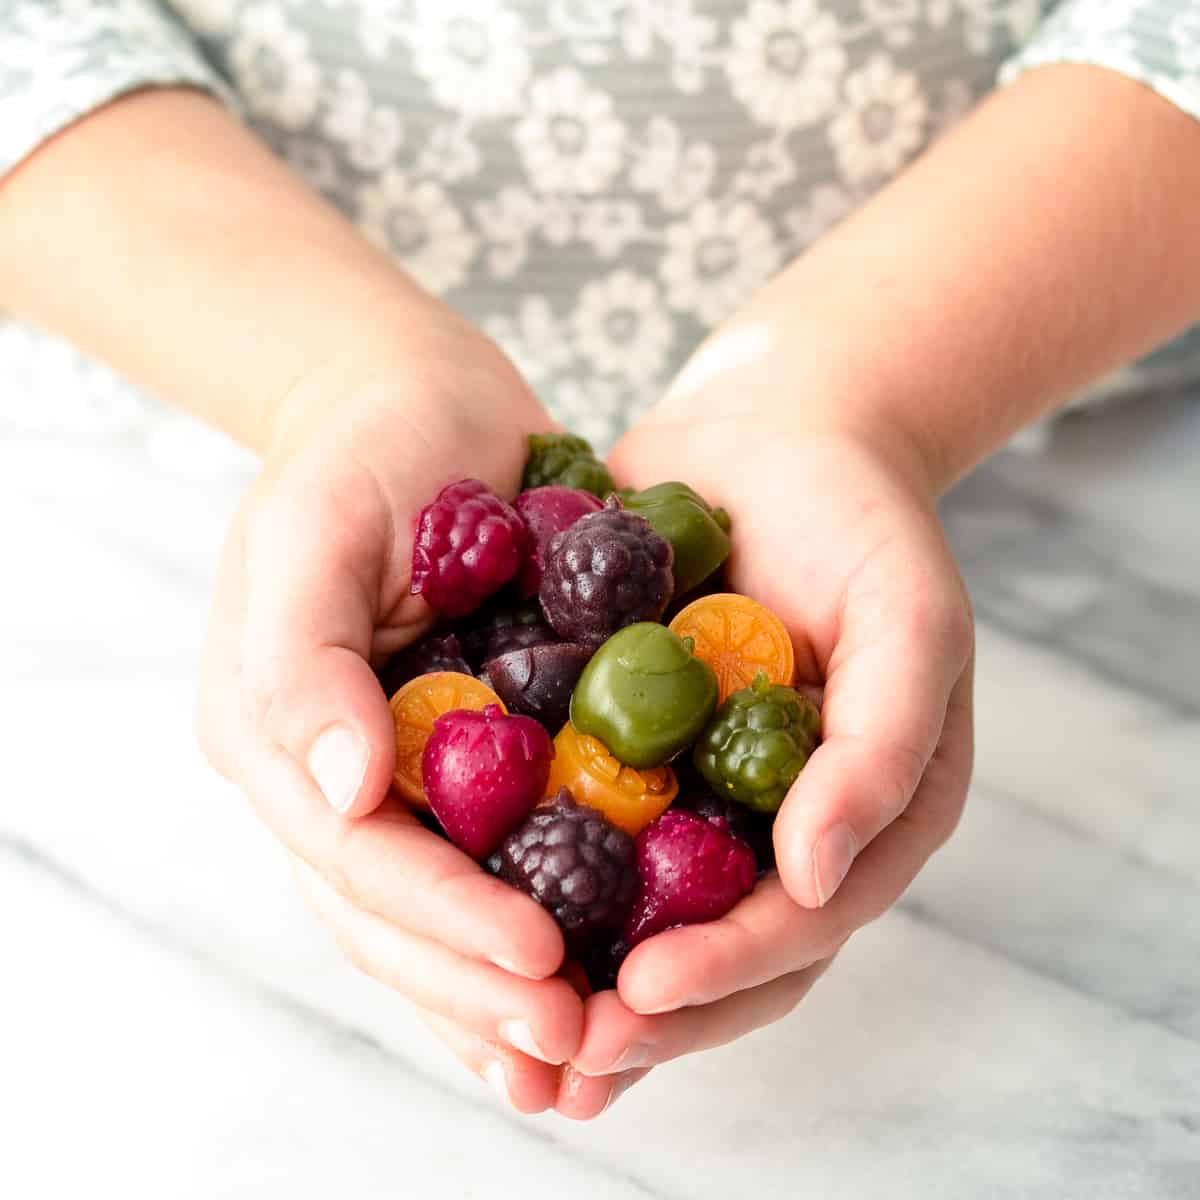 Kid's hands holding a handful of Homemade Fruit Snacks recipe